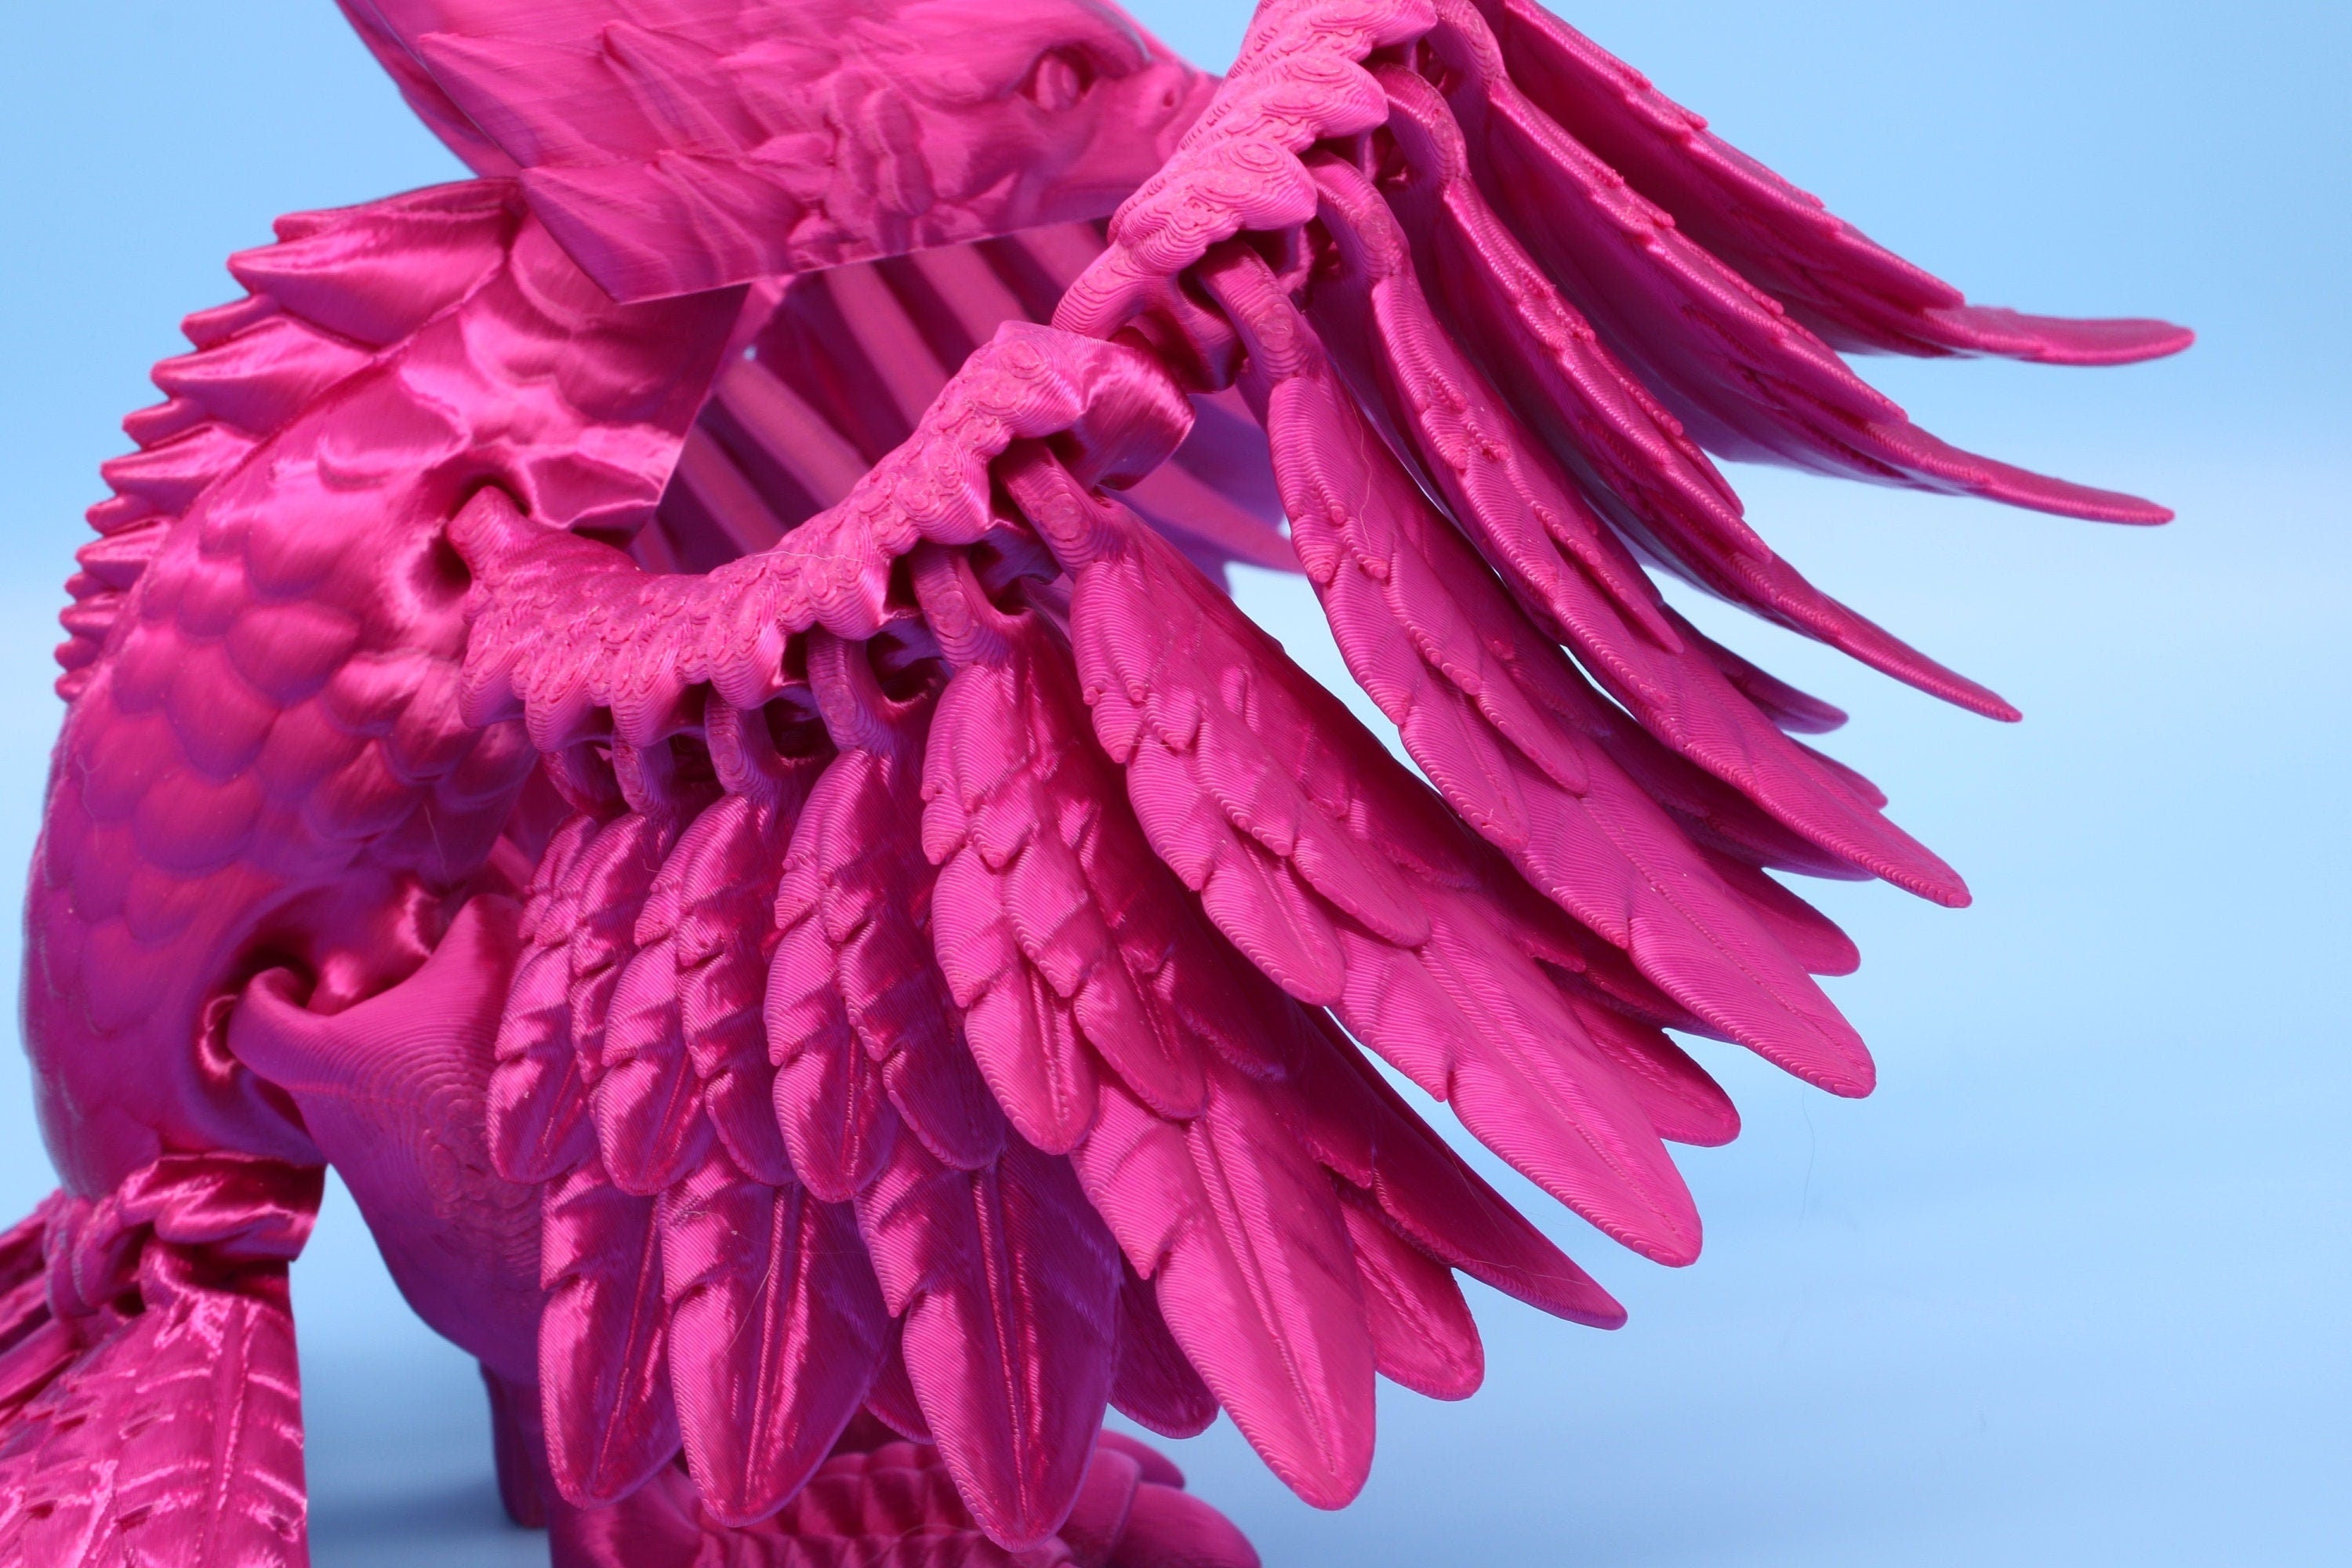 XL Phoenix Pink | Cute Flexi | Unique 3D printed. | Great Articulating fidget toy, desk, sensory toy | 5.5 inch tall | 10 in wing span.